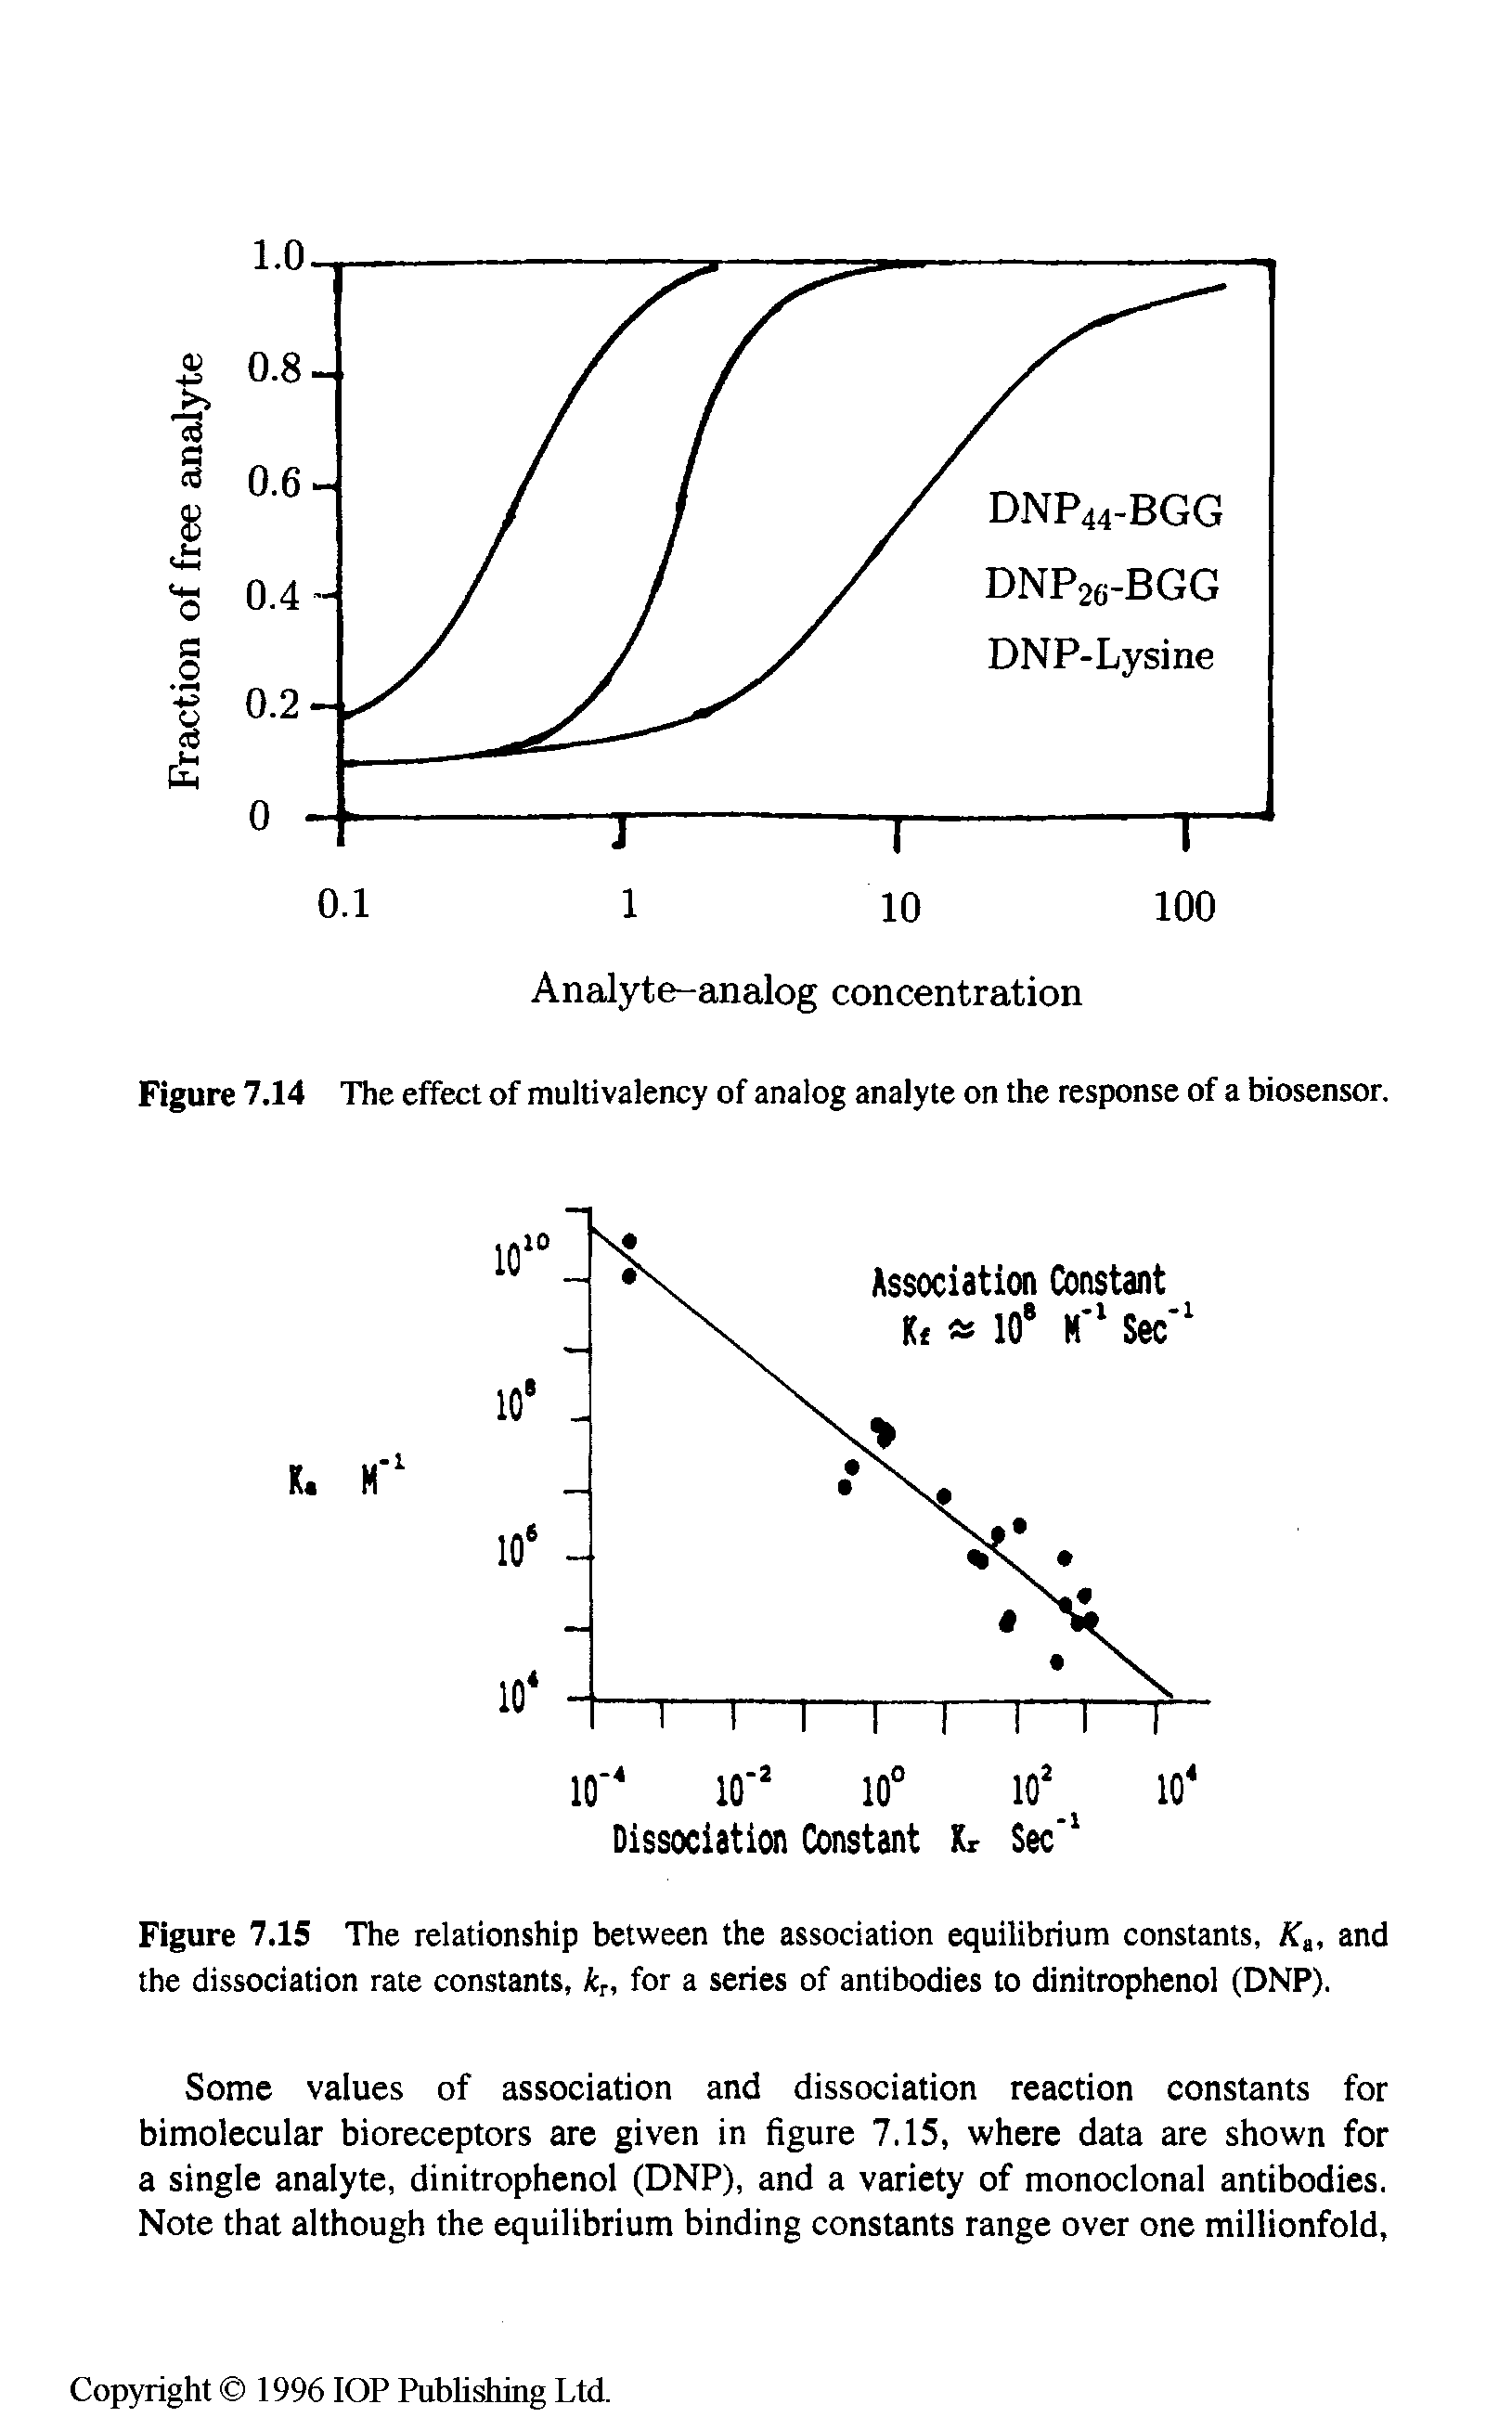 Figure 7.14 The effect of multivalency of analog analyte on the response of a biosensor.